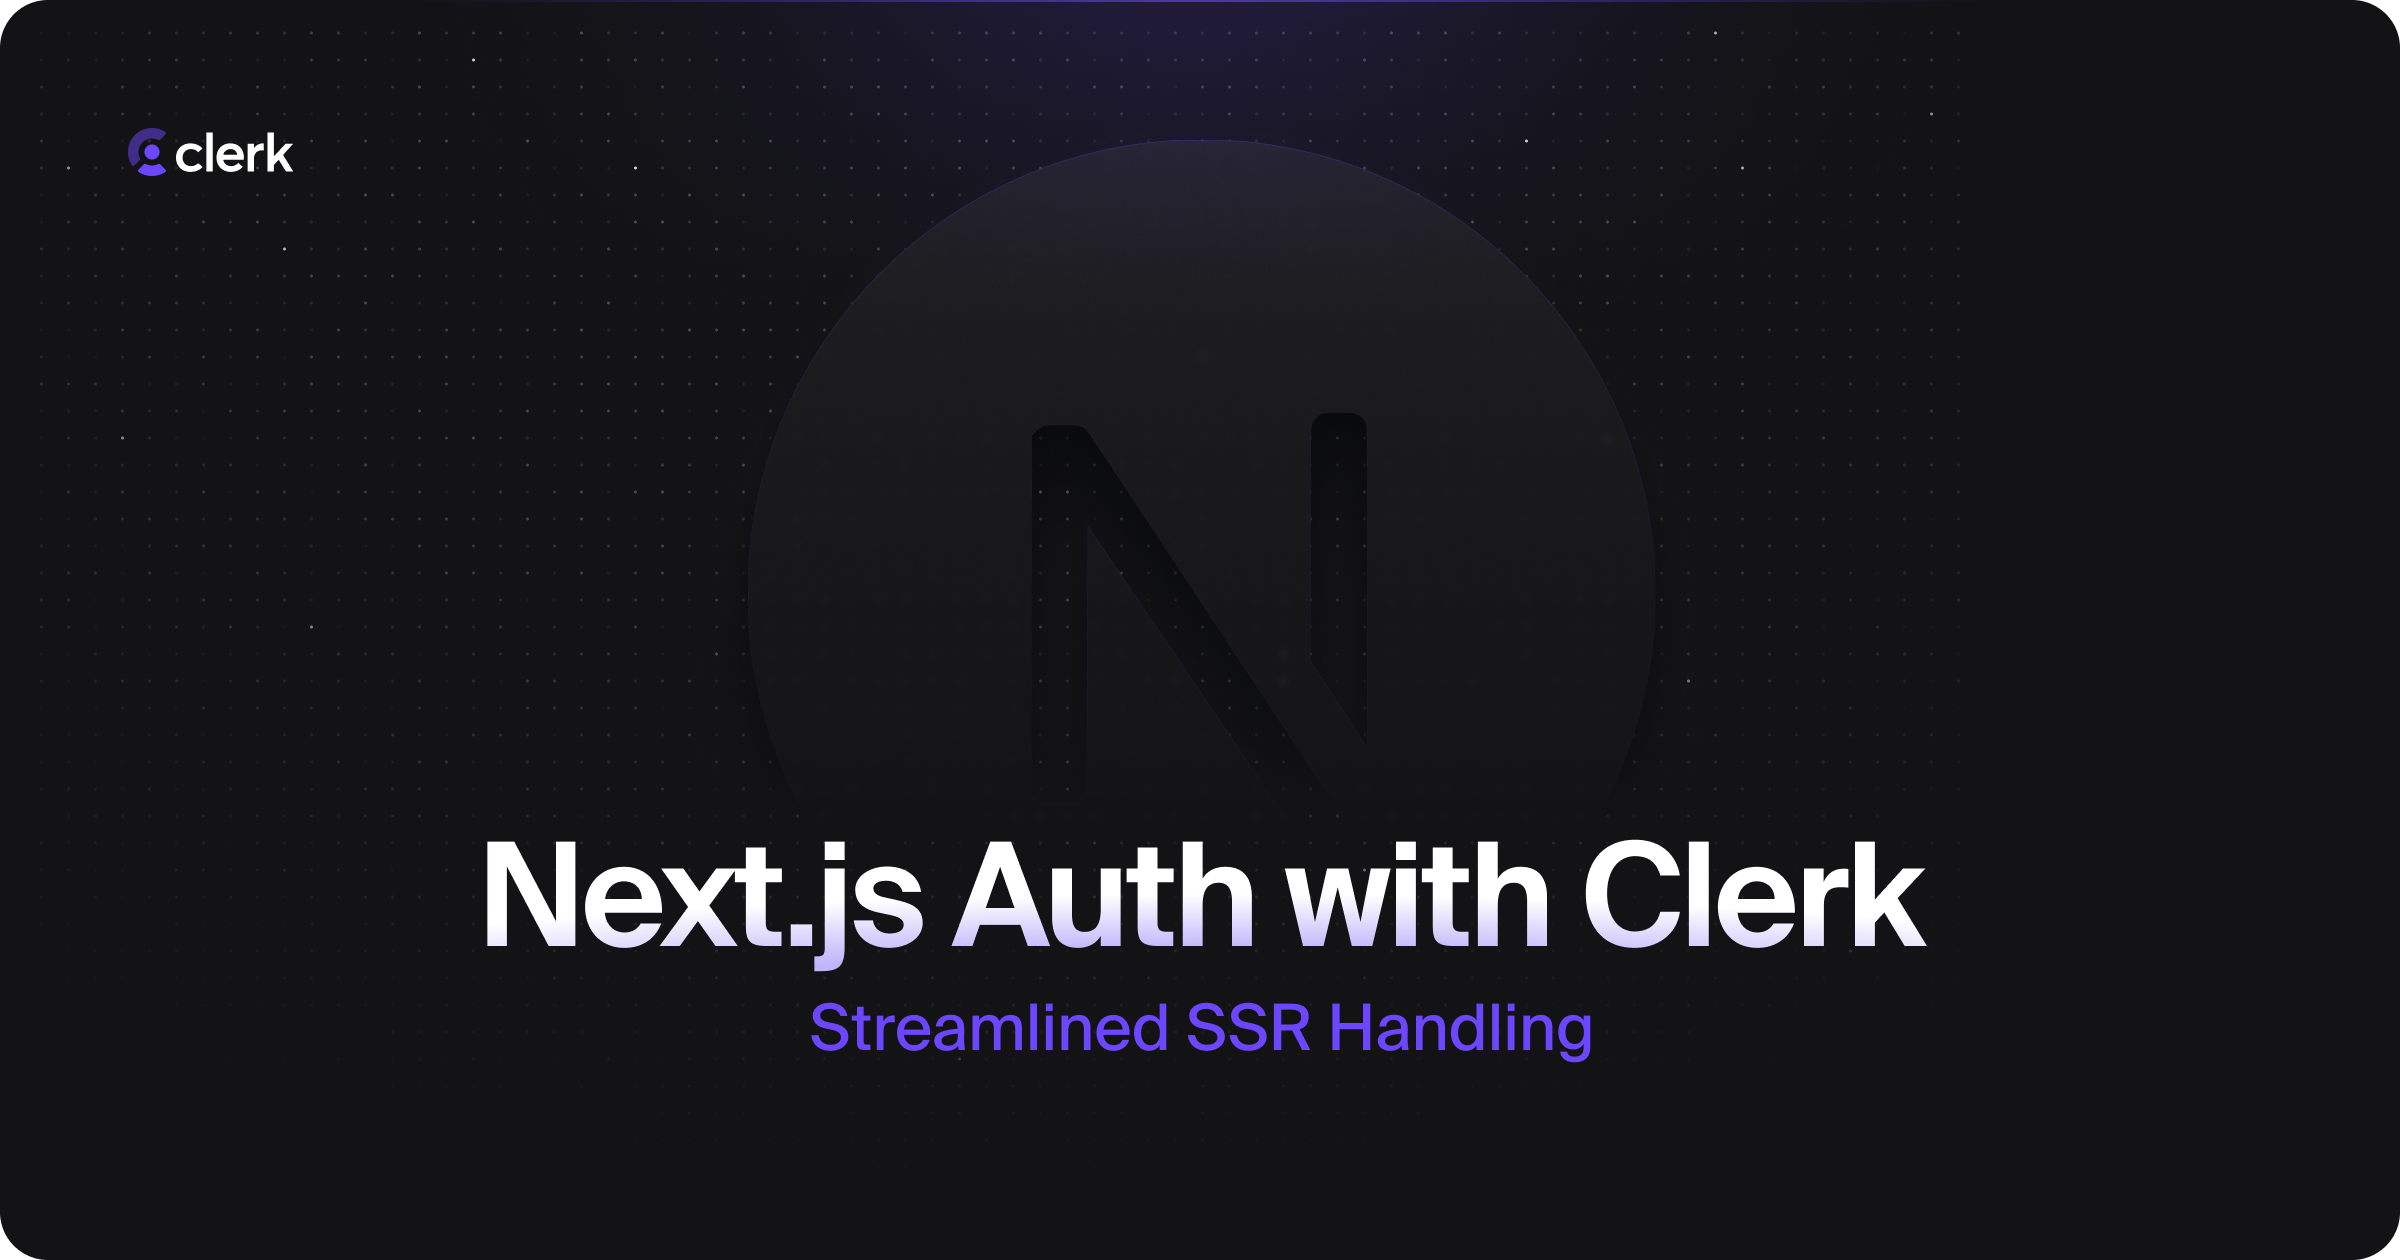 Next.js Authentication with Clerk: Streamlined SSR Handling